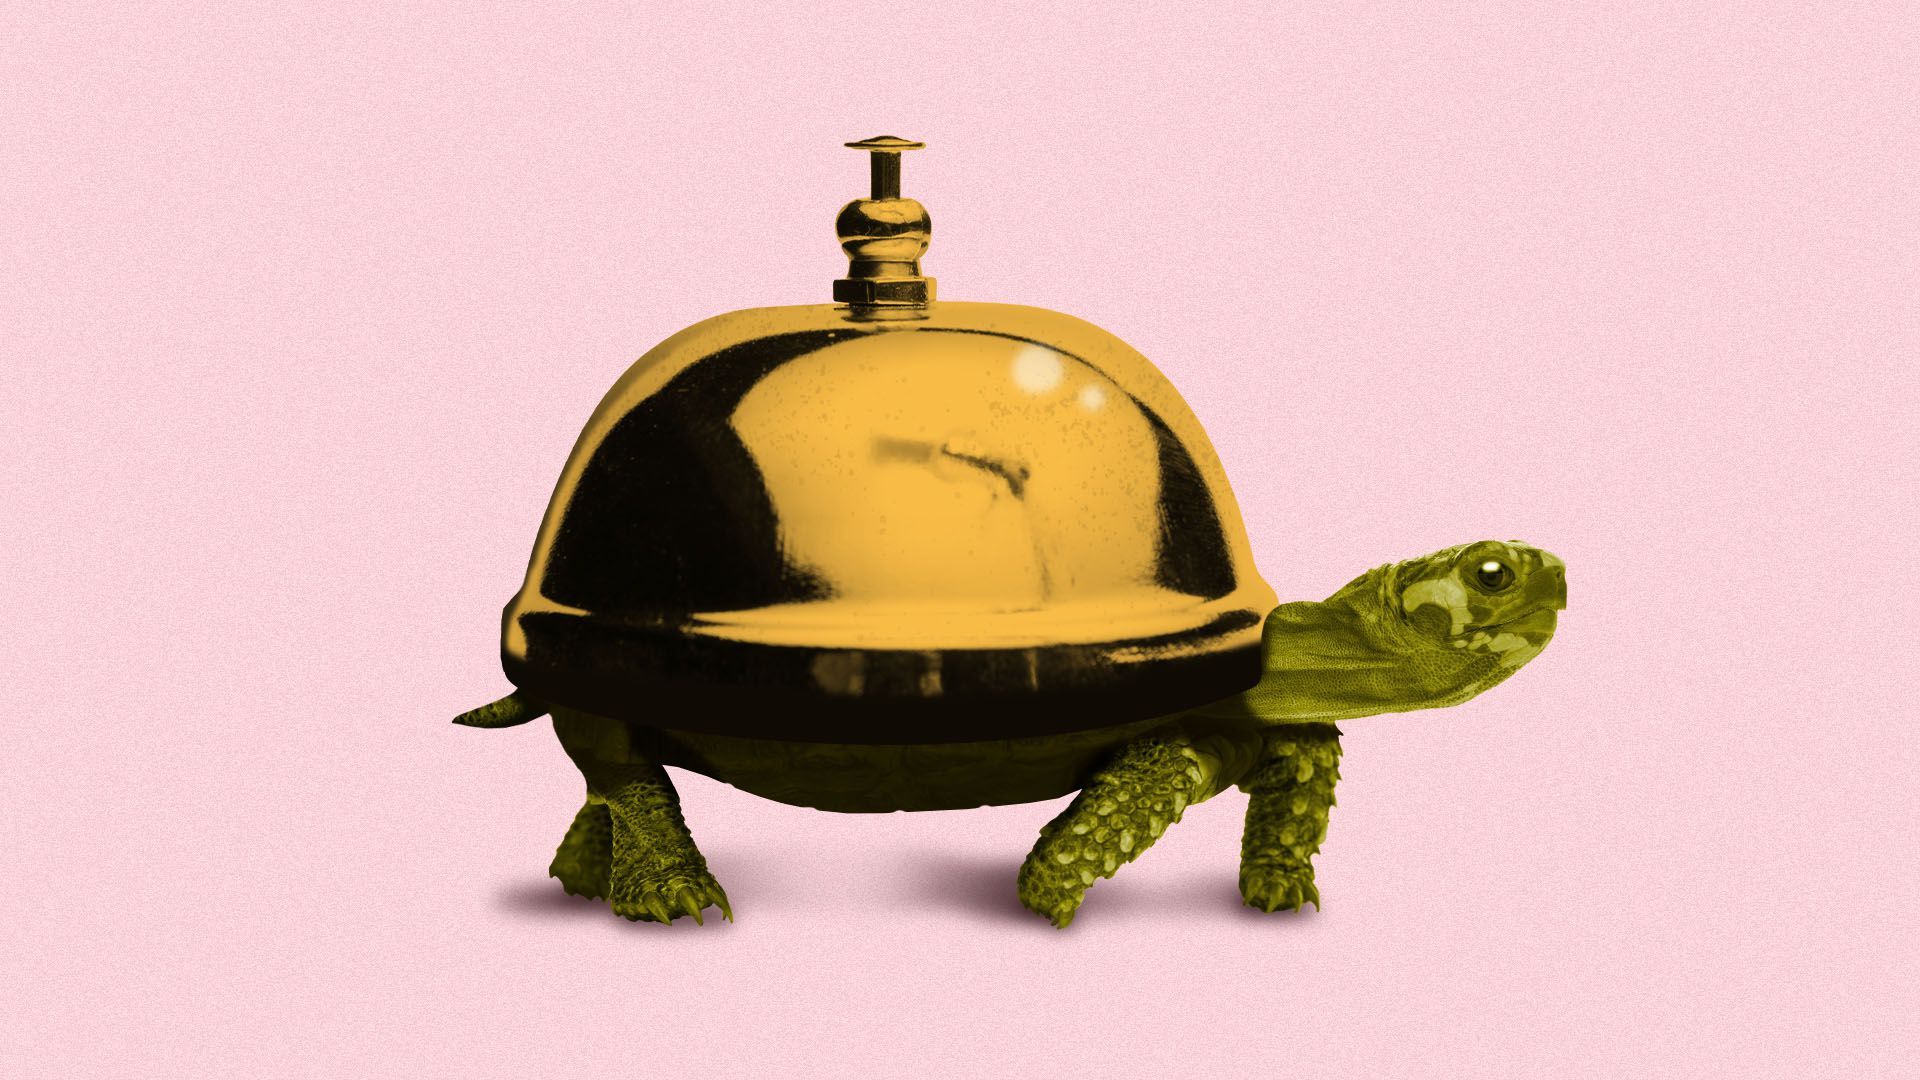 Illustration of a shop desk bell as the shell of a turtle